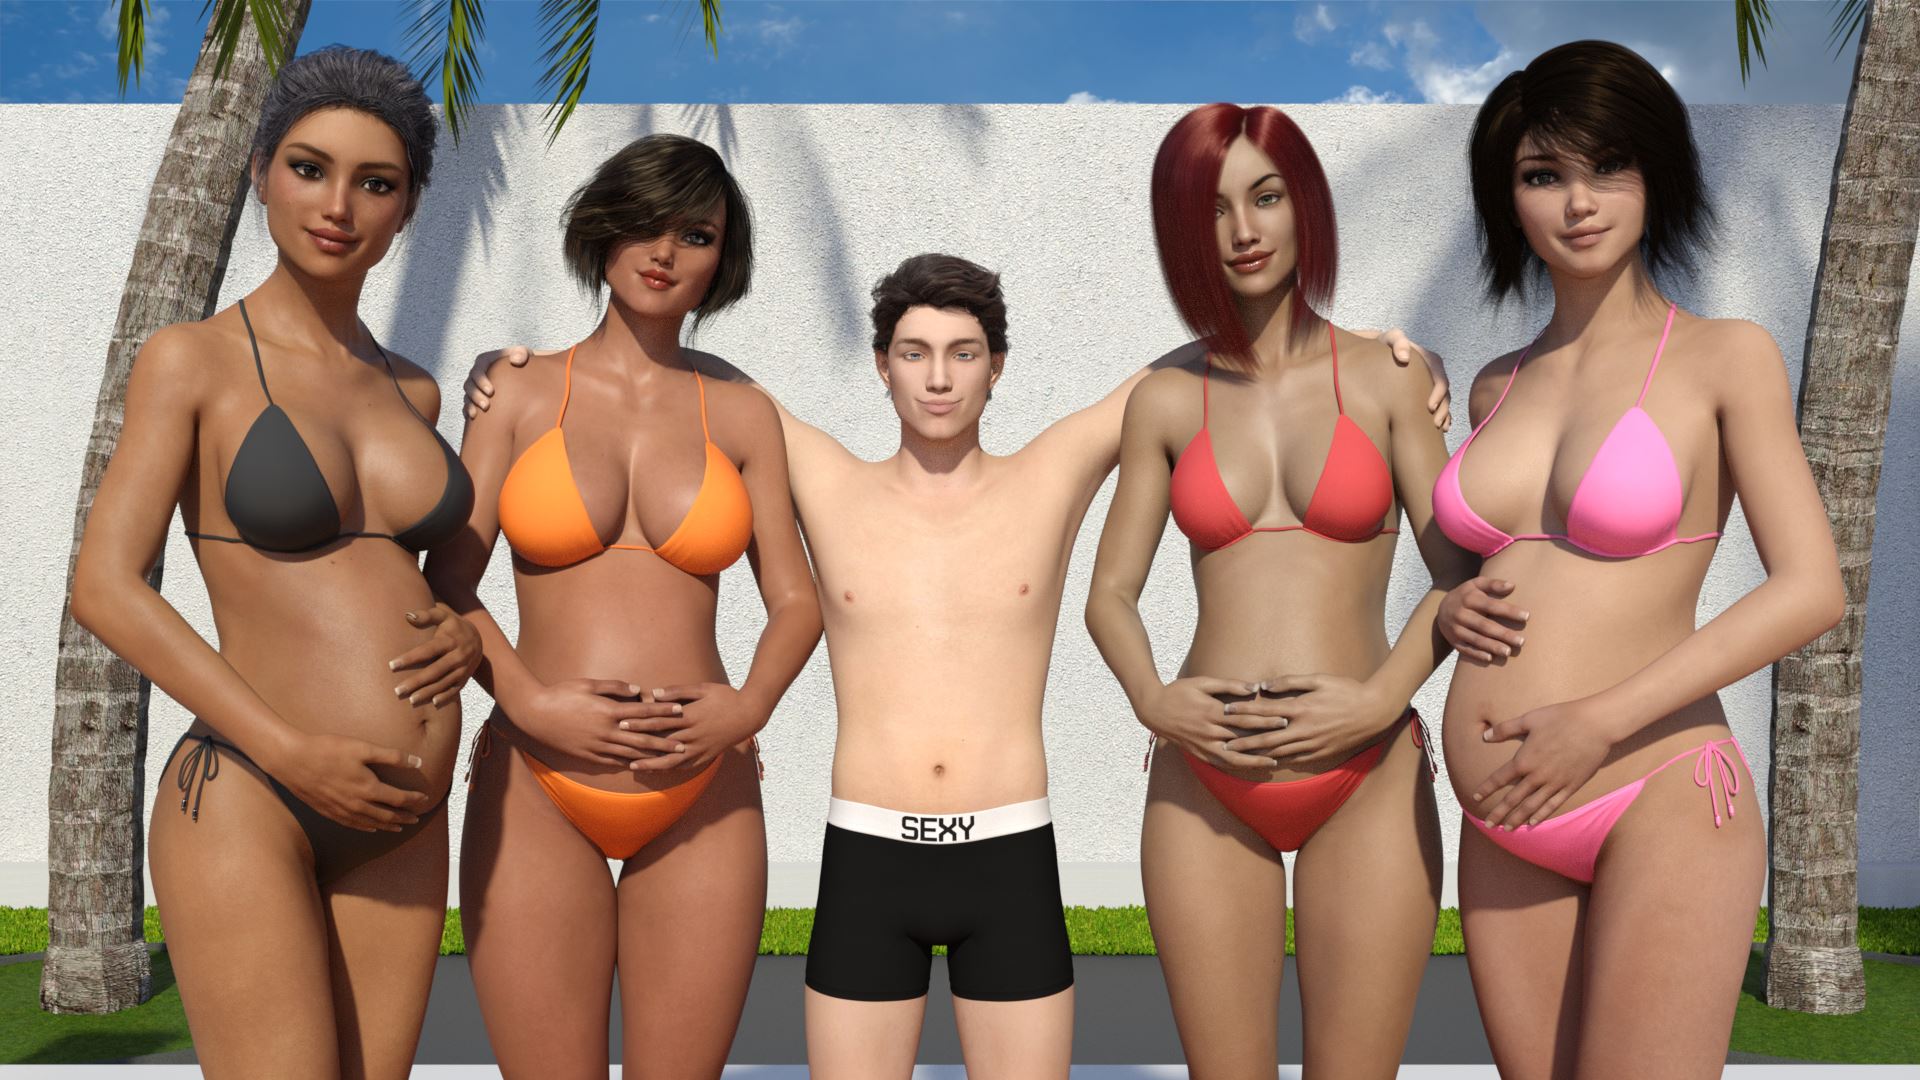 Big Brother Expanding The Family Ren'Py Porn Sex Game v.0.1 Download for  Windows, MacOS, Linux